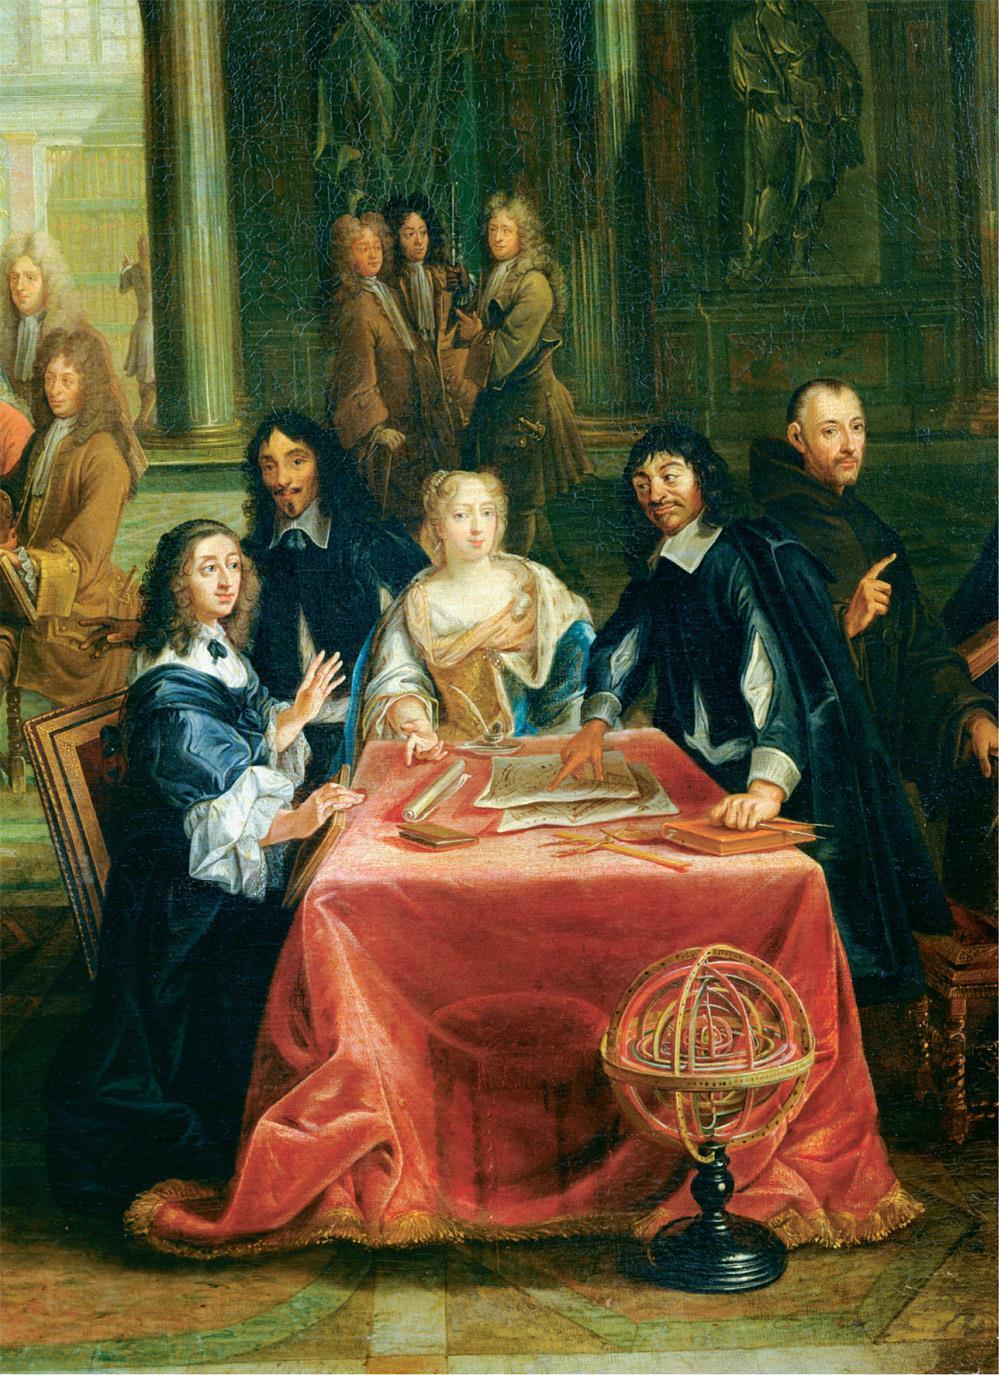 Queen Christina of Sweden (r. 1632 1654), shown here with French philosopher and scientist René Descartes, was one of many women from the elite classes interested in the new science.